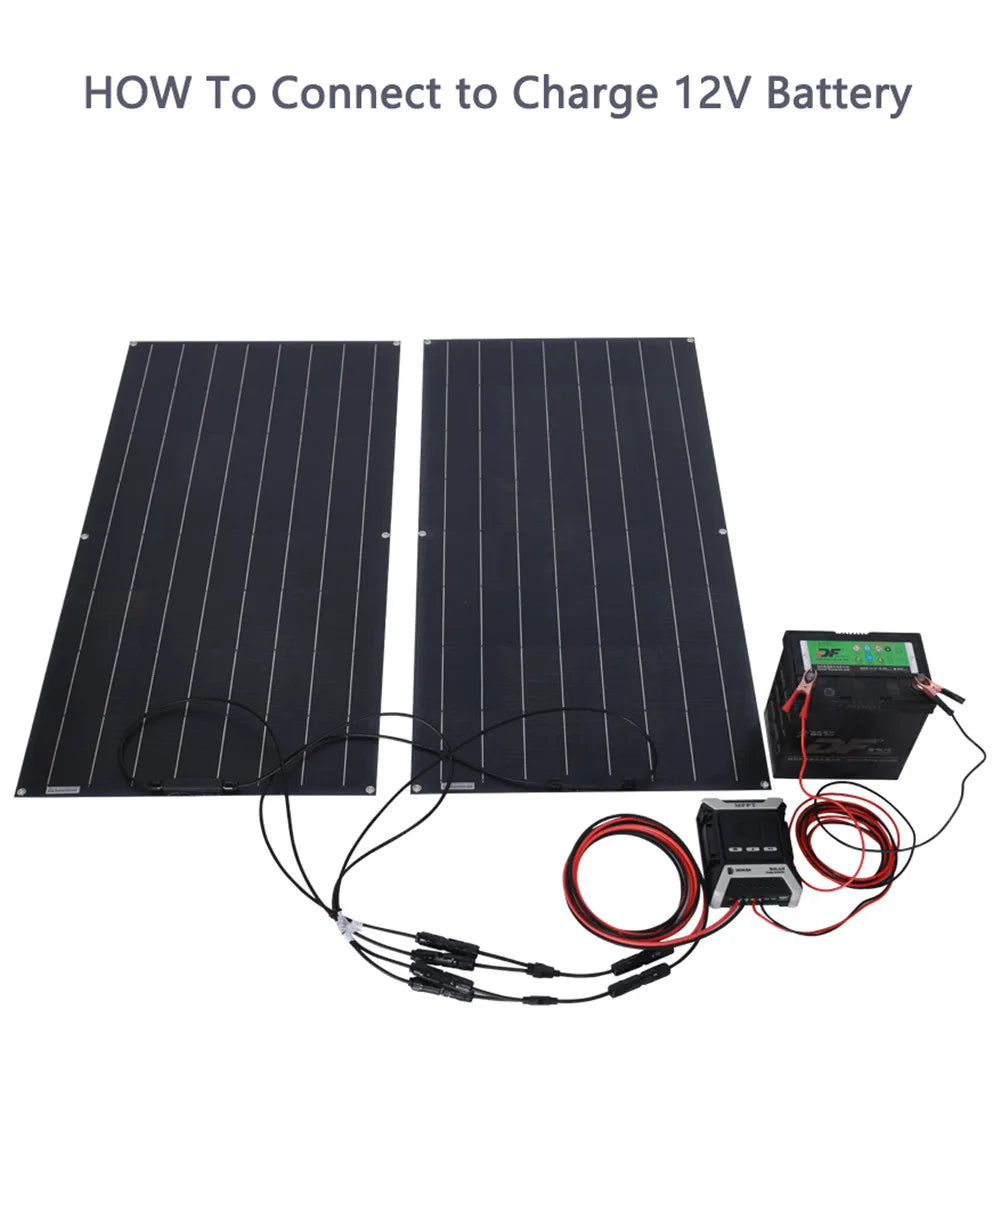 Connect this solar panel to charge your 12V battery for off-grid power.